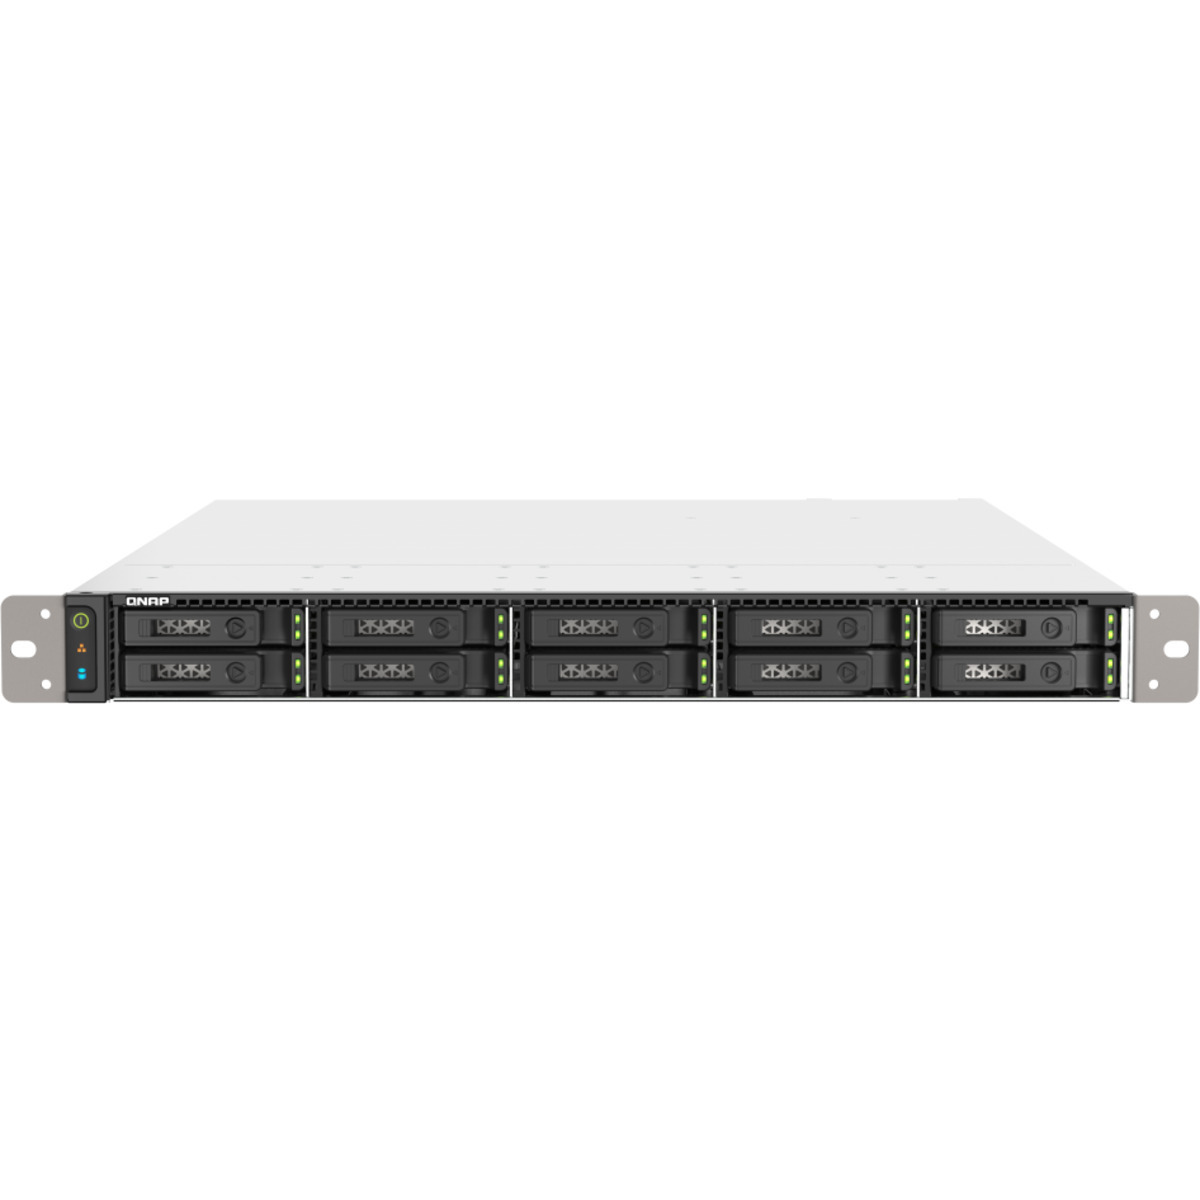 QNAP TS-h1090FU-7232P 2.2tb 10-Bay RackMount Large Business / Enterprise NAS - Network Attached Storage Device 9x250gb Sandisk Plus Series SDSSDA3N-250G  2400/1500MB/s M.2 2280 NVMe SSD CONSUMER Class Drives Installed - Burn-In Tested TS-h1090FU-7232P